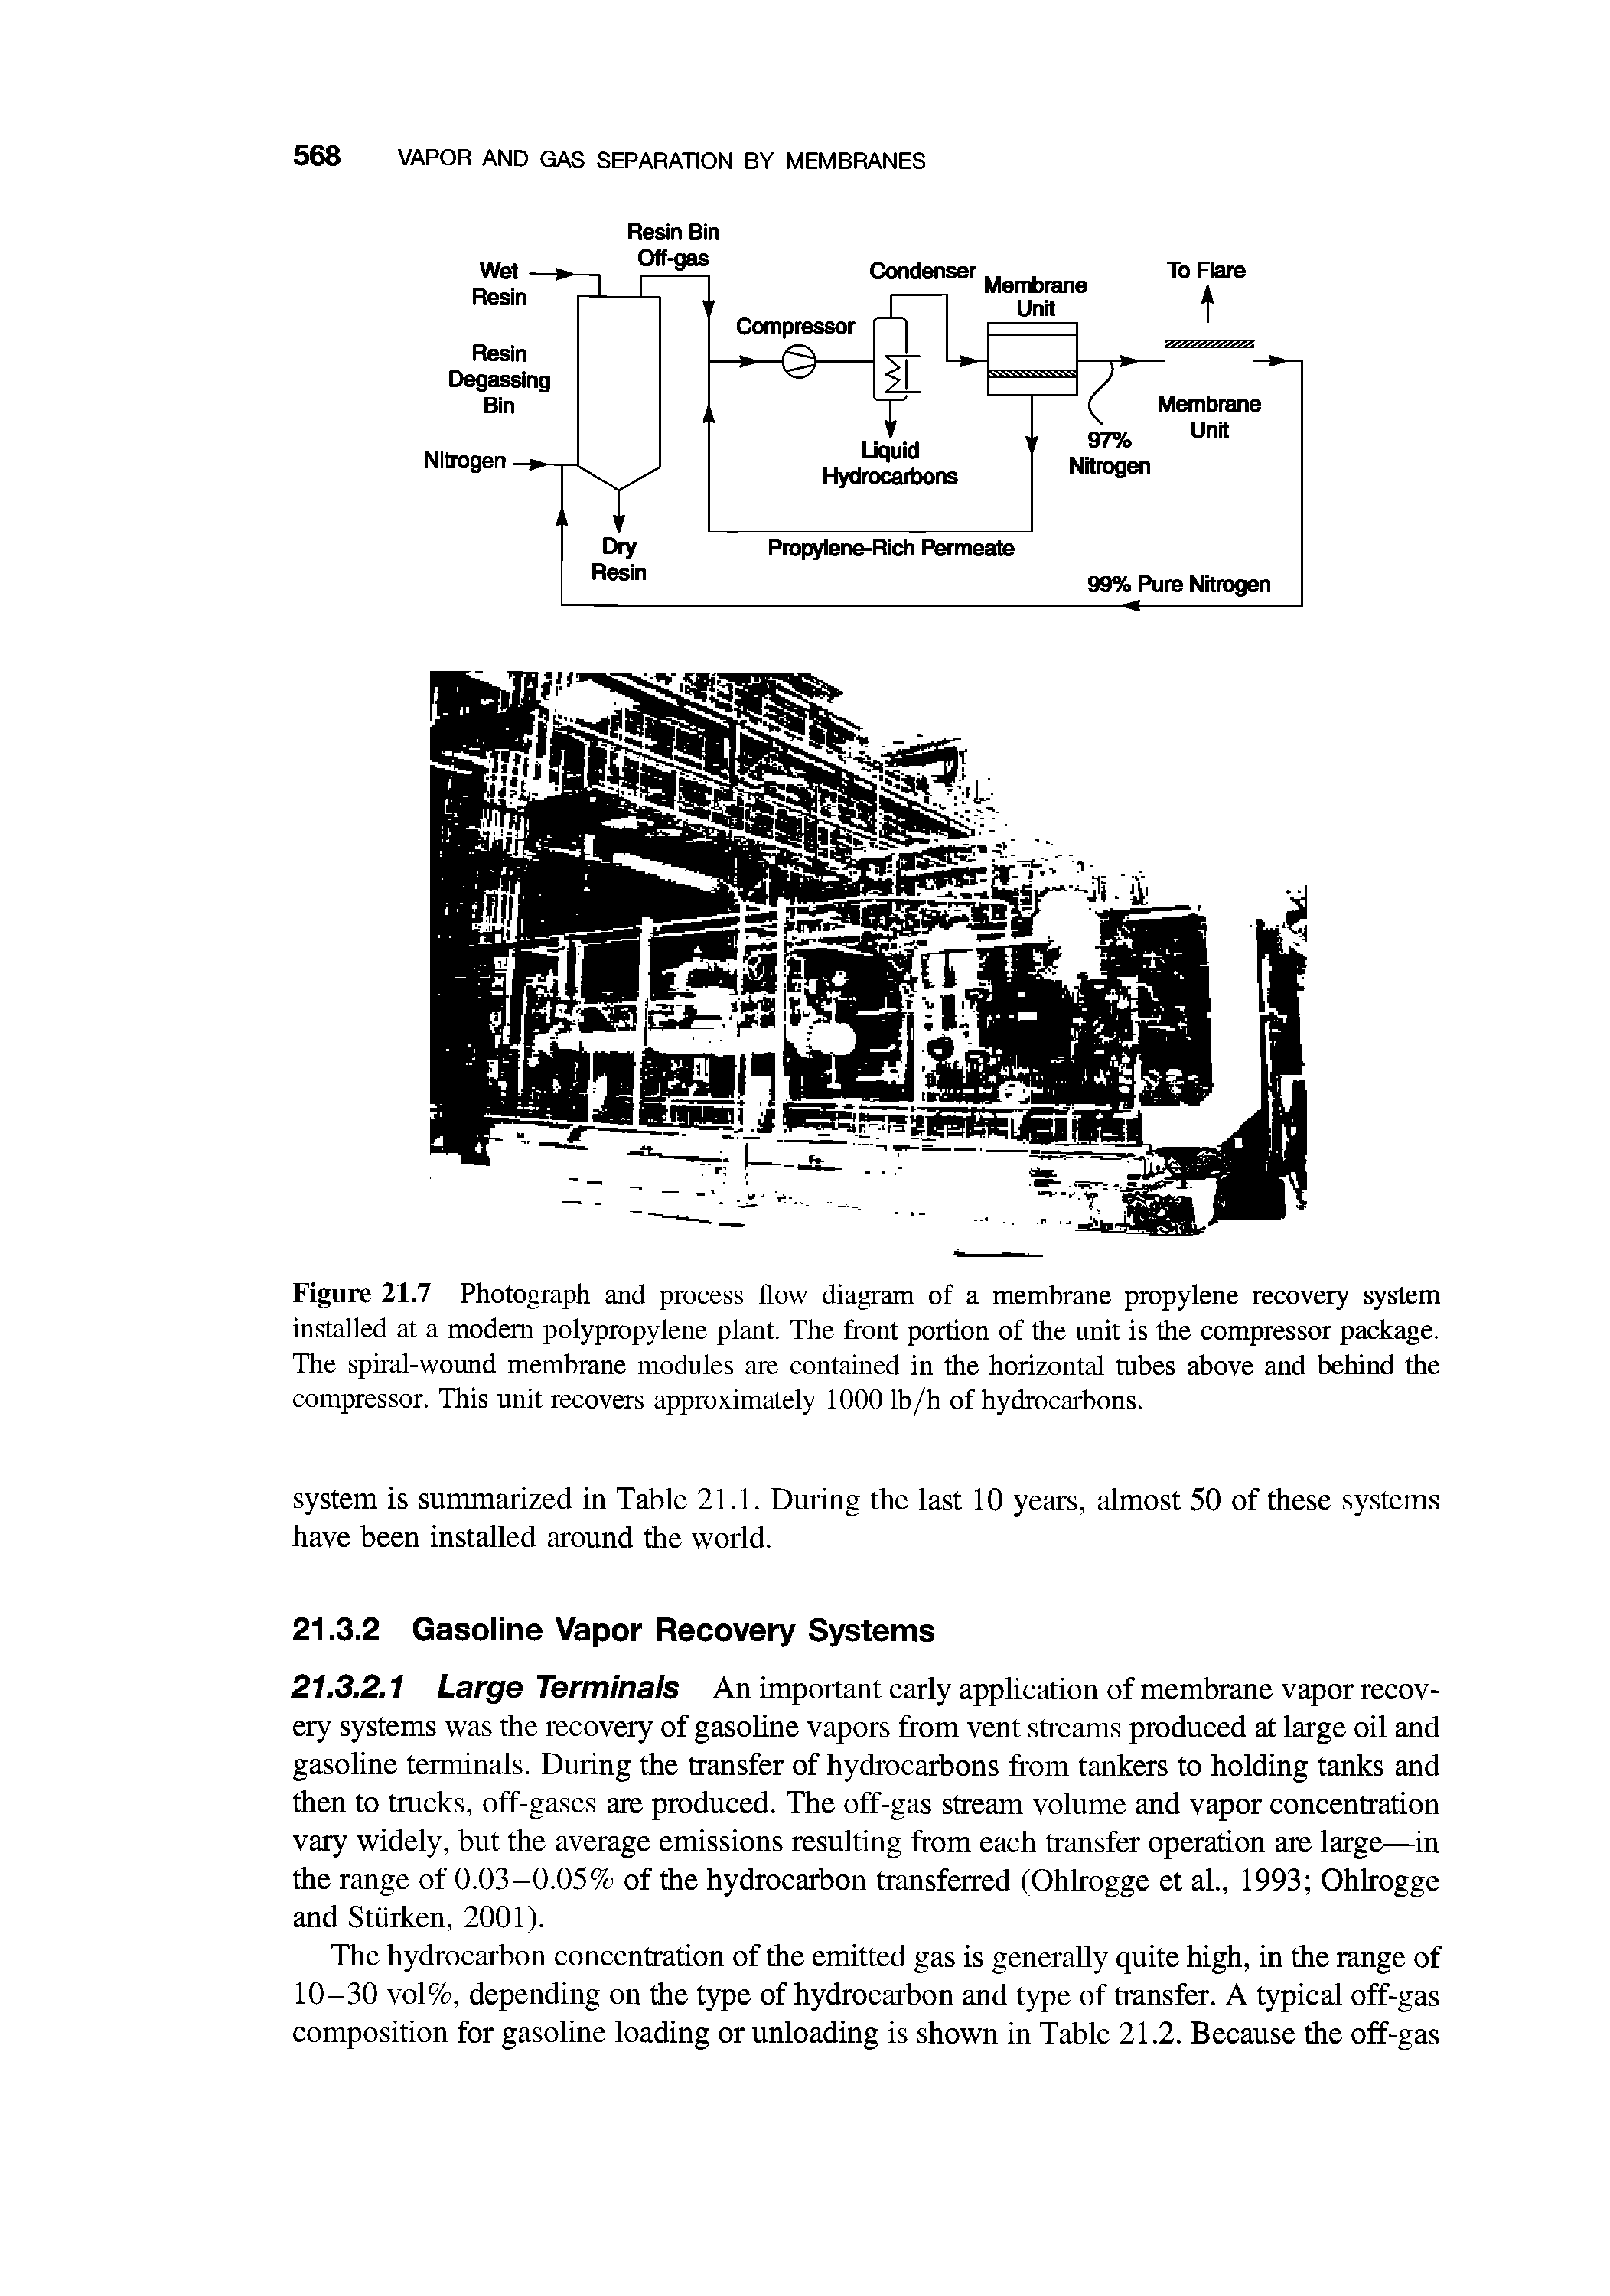 Figure 21.7 Photograph and process flow diagram of a membrane propylene recovery system installed at a modem polypropylene plant. The front portion of the unit is the compressor package. The spiral-wound membrane modules are contained in the horizontal tubes above and behind the compressor. This unit recovers approximately 1000 Ib/h of hydrocarbons.